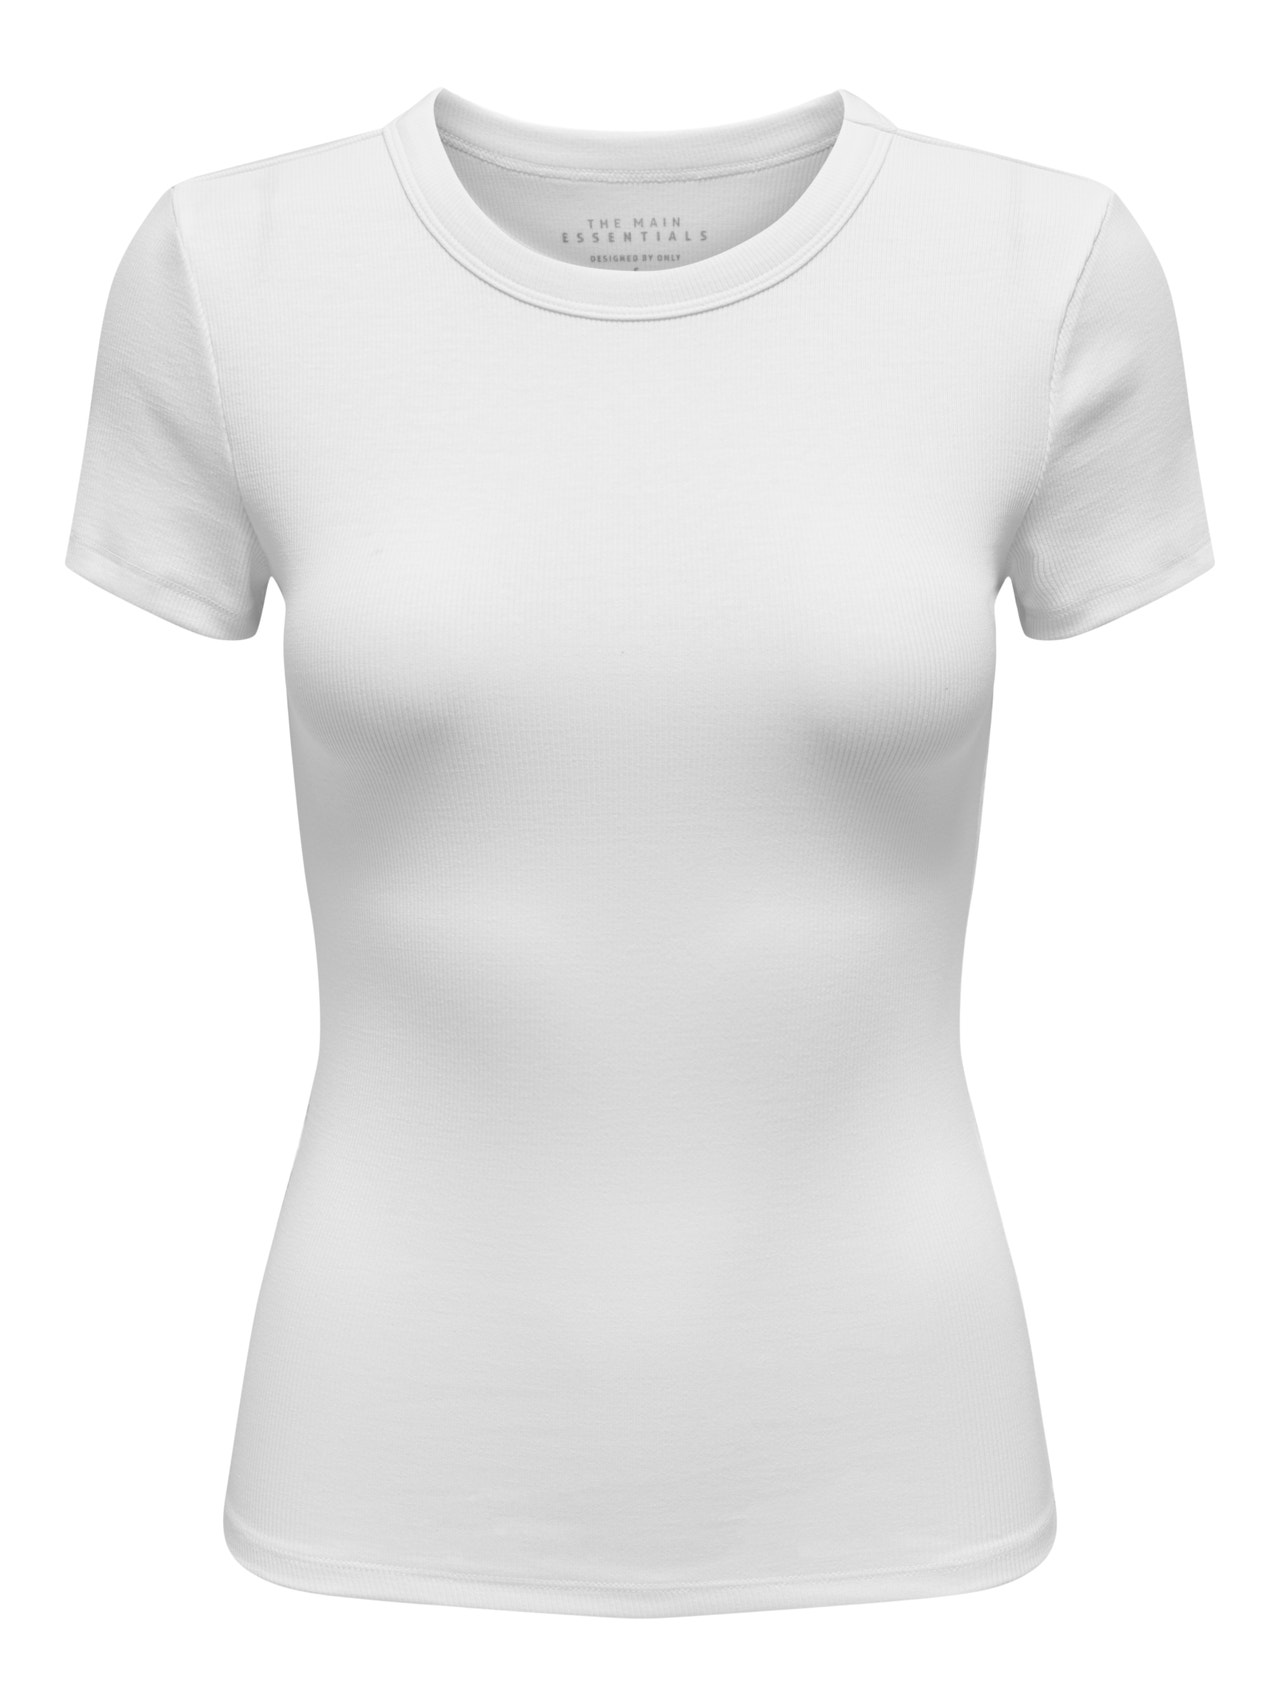 ONLY O-hals top  -Bright White - 15330639